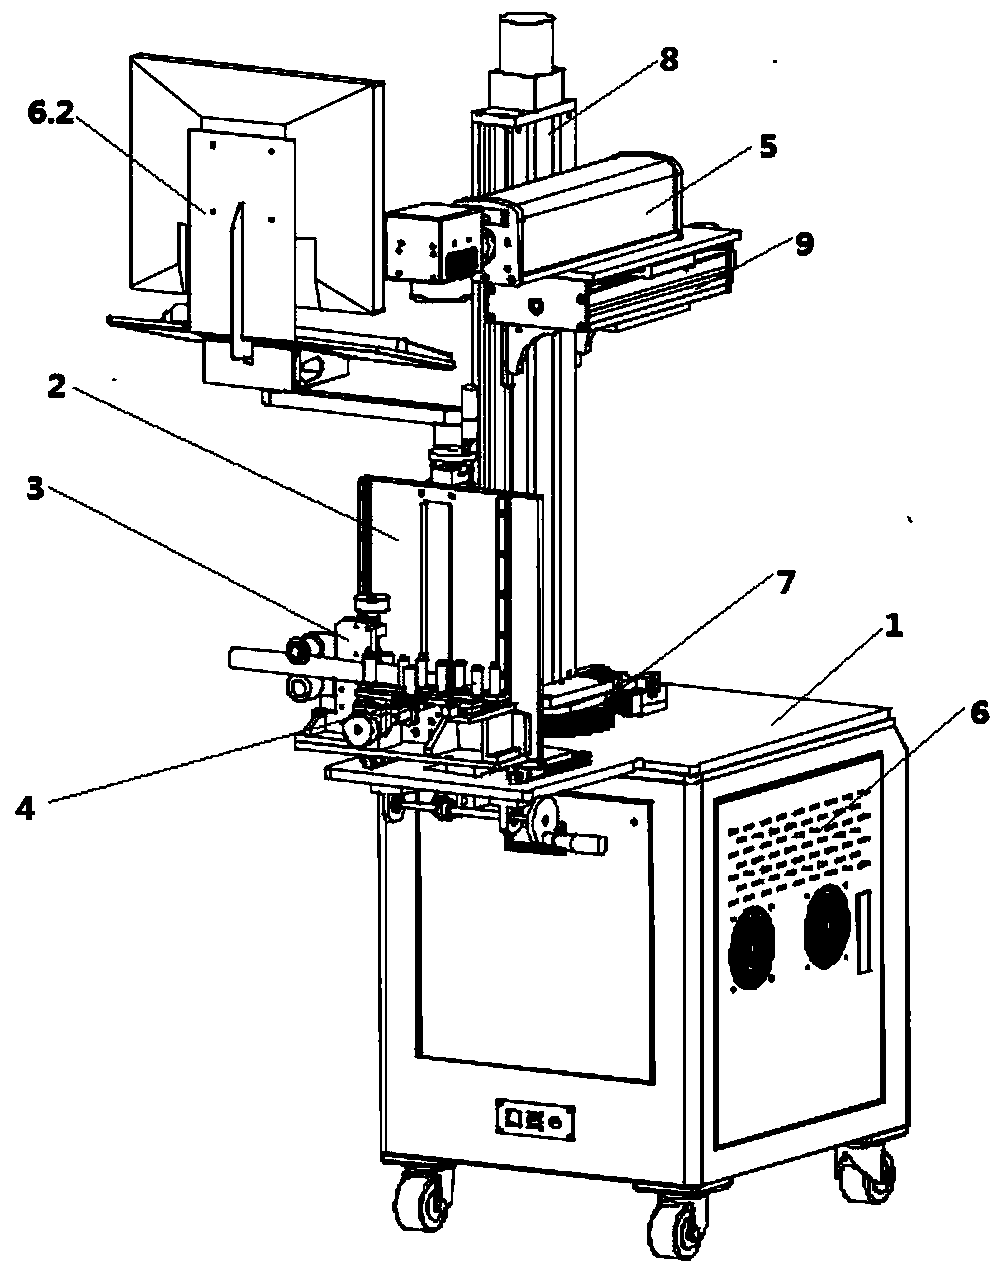 Assembly line flight marking equipment and marking method